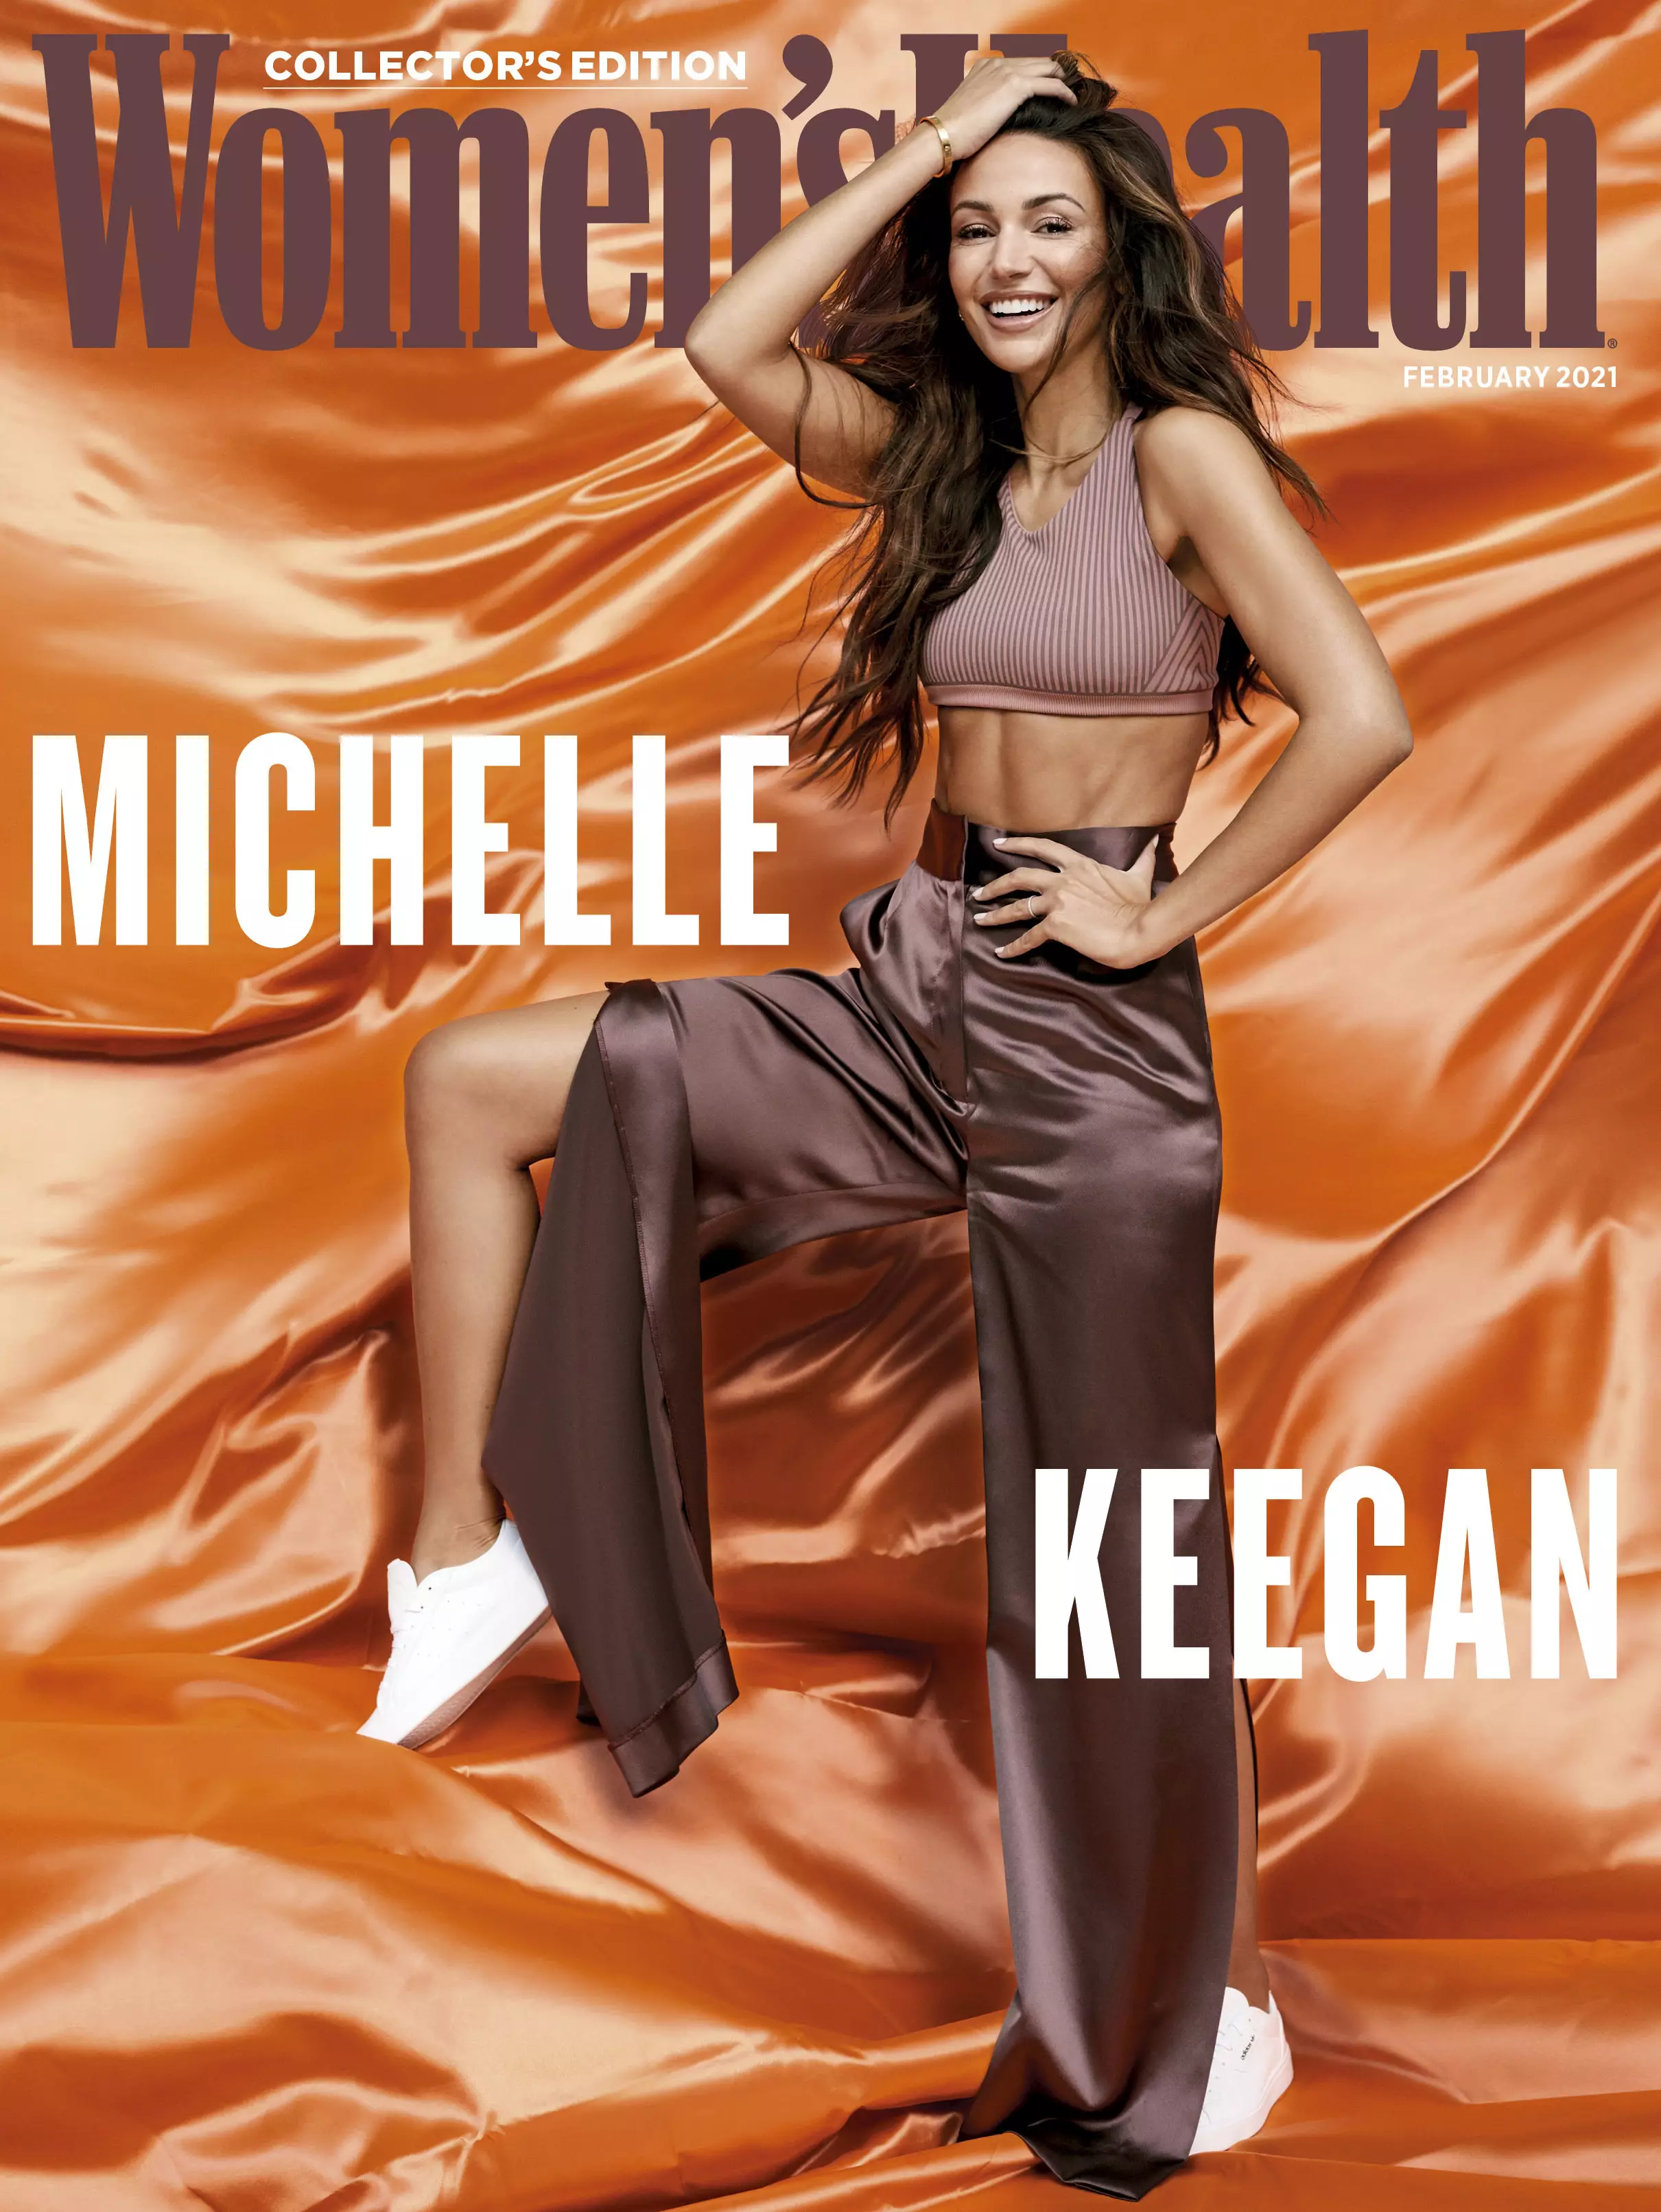 Michelle Keegan made the comments in a new interview (Credit - Peter Pedonomou / Women's Health UK)